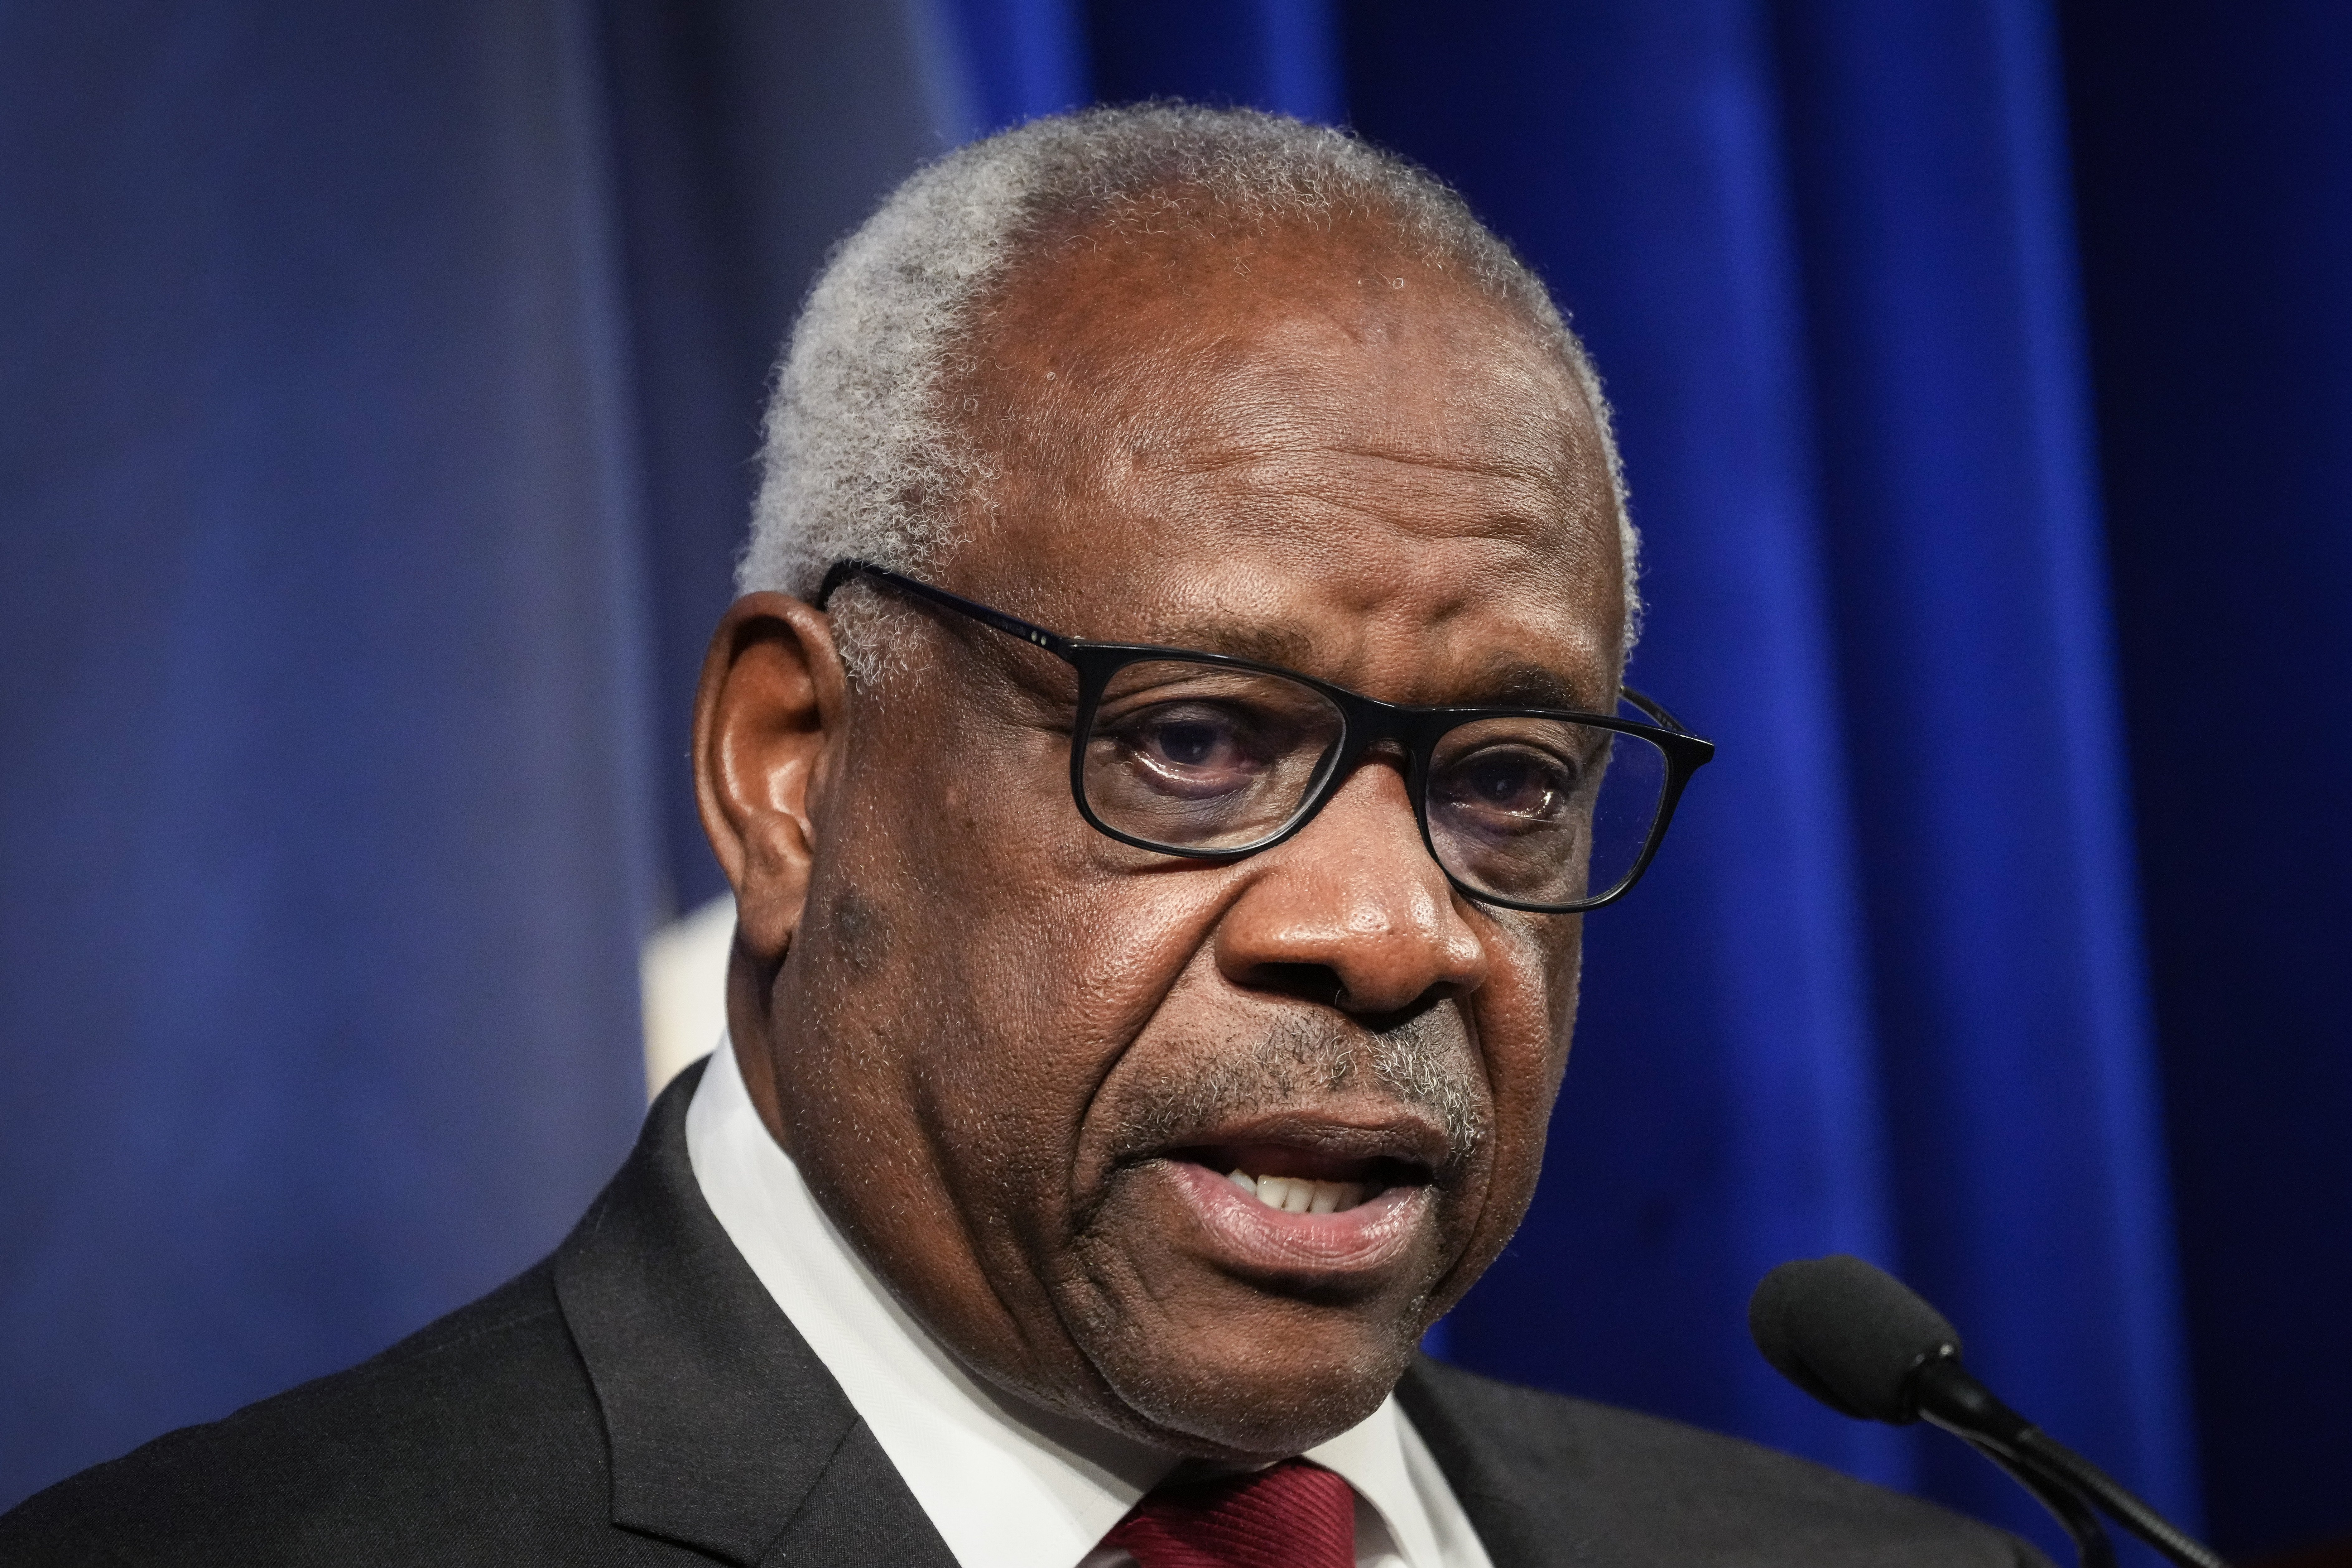 Supreme Court Justice Clarence Thomas speaking at the Heritage Foundation in Washington, DC | Source: Getty Images